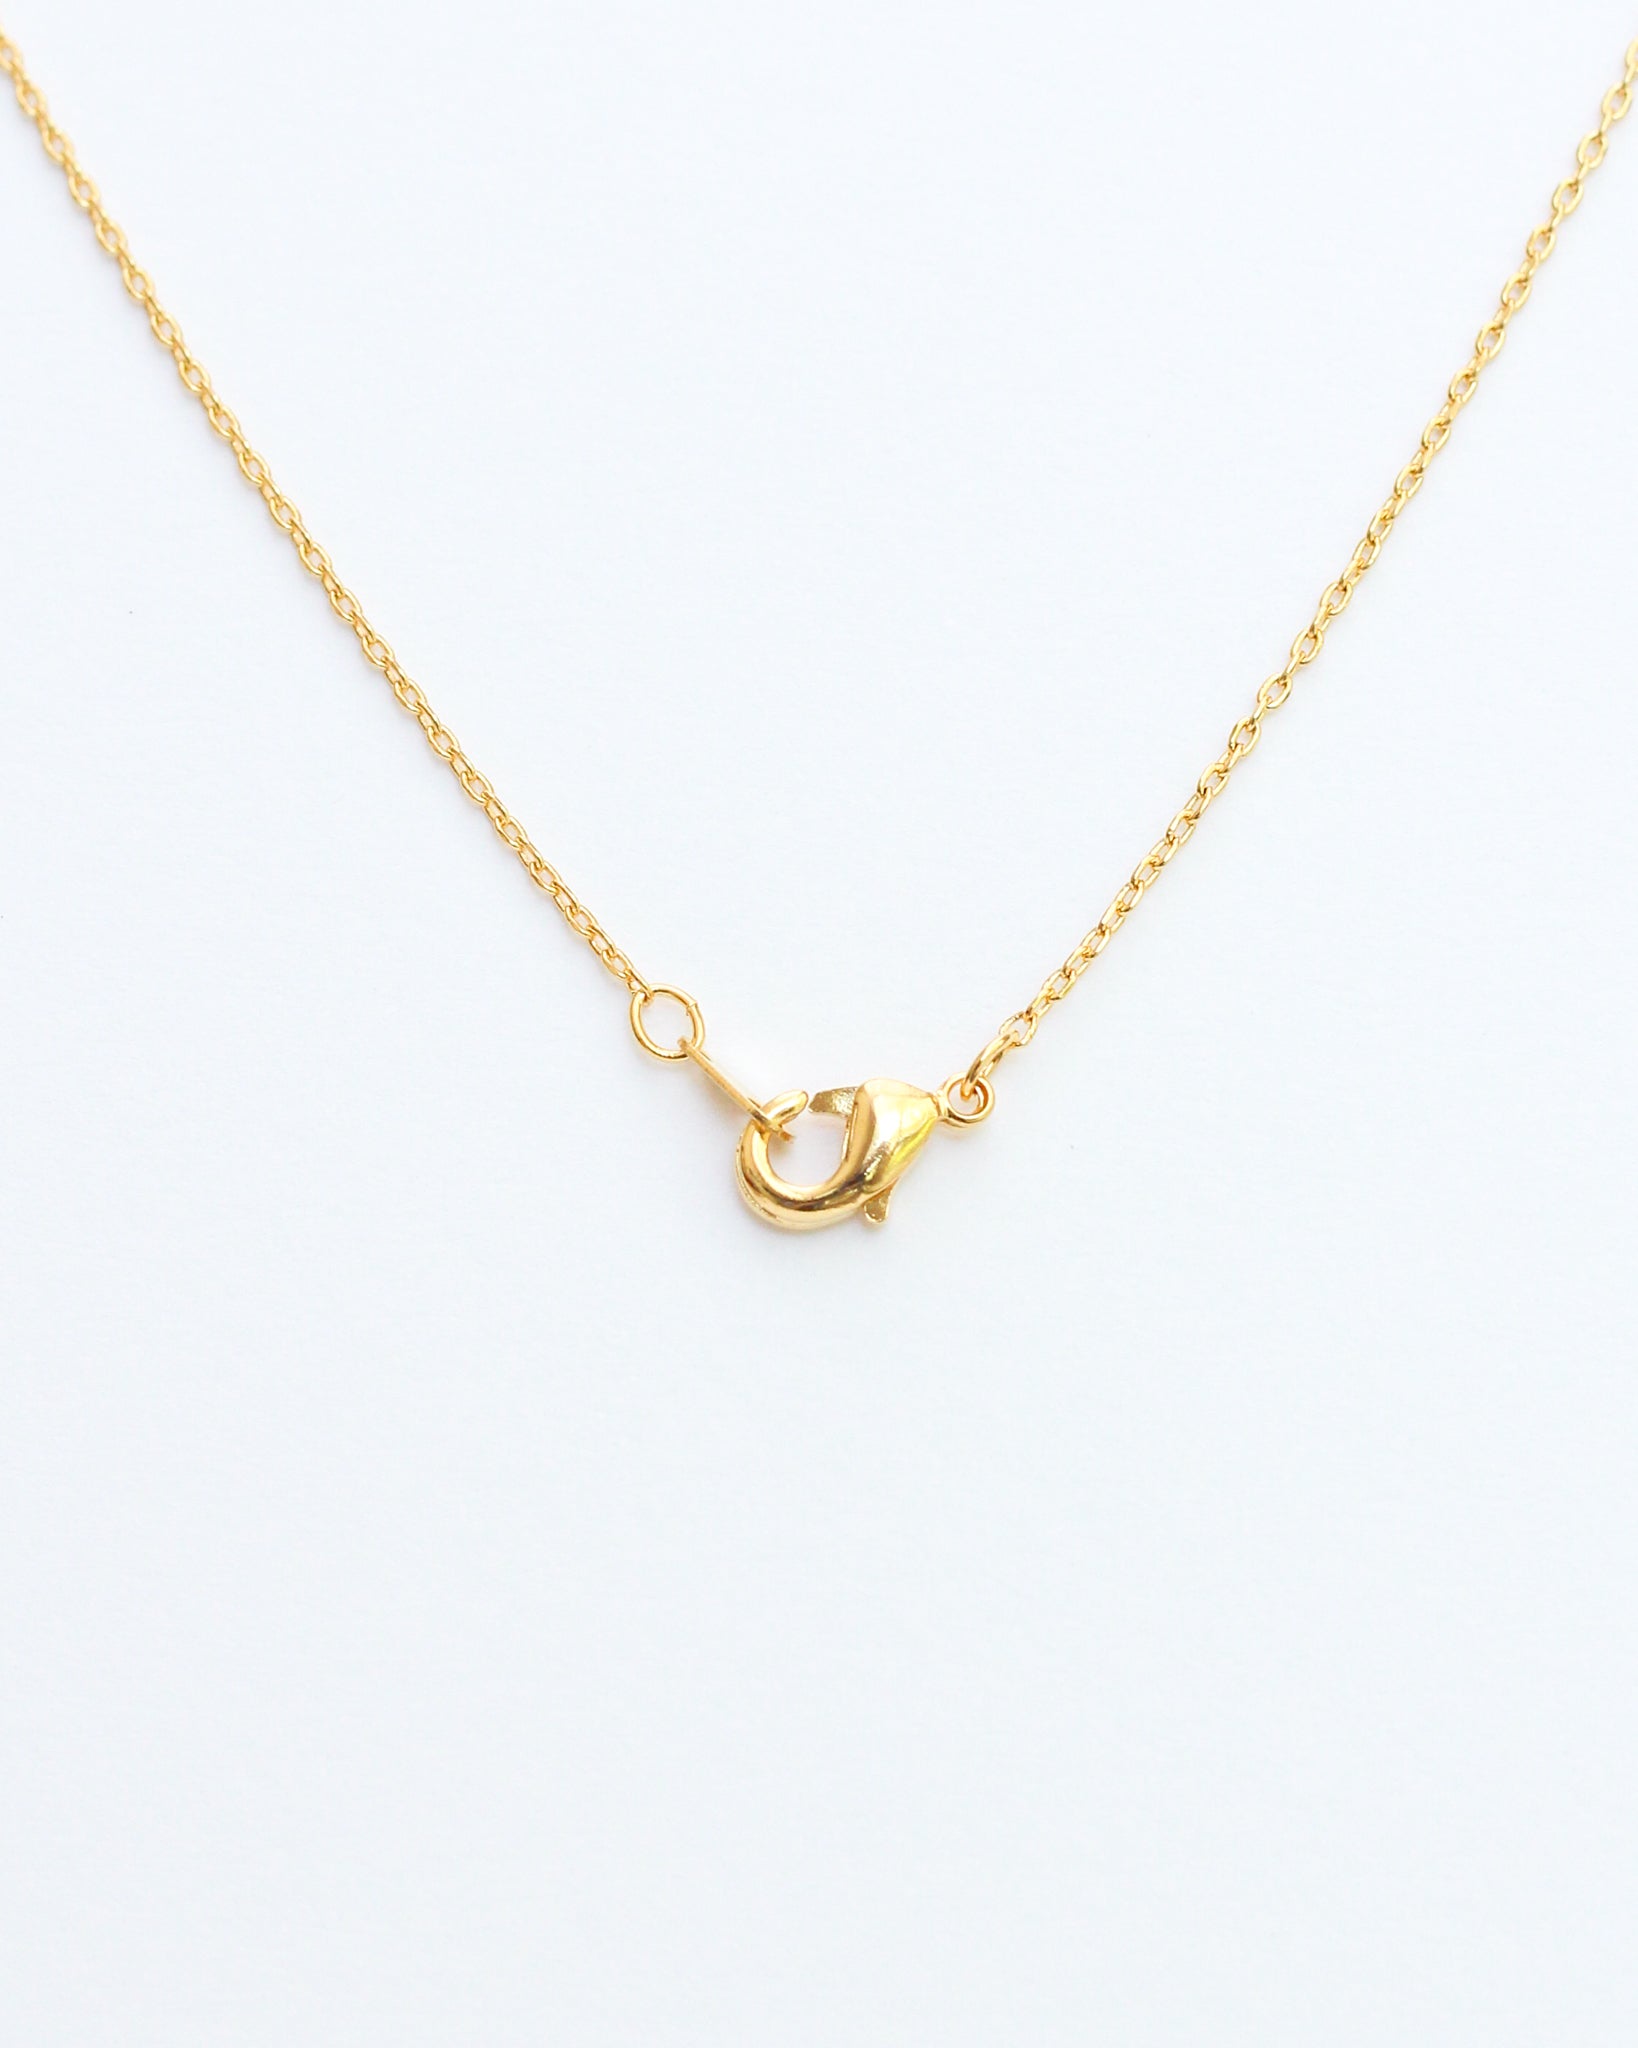 Gold initial necklace.  Lobster clasp view.